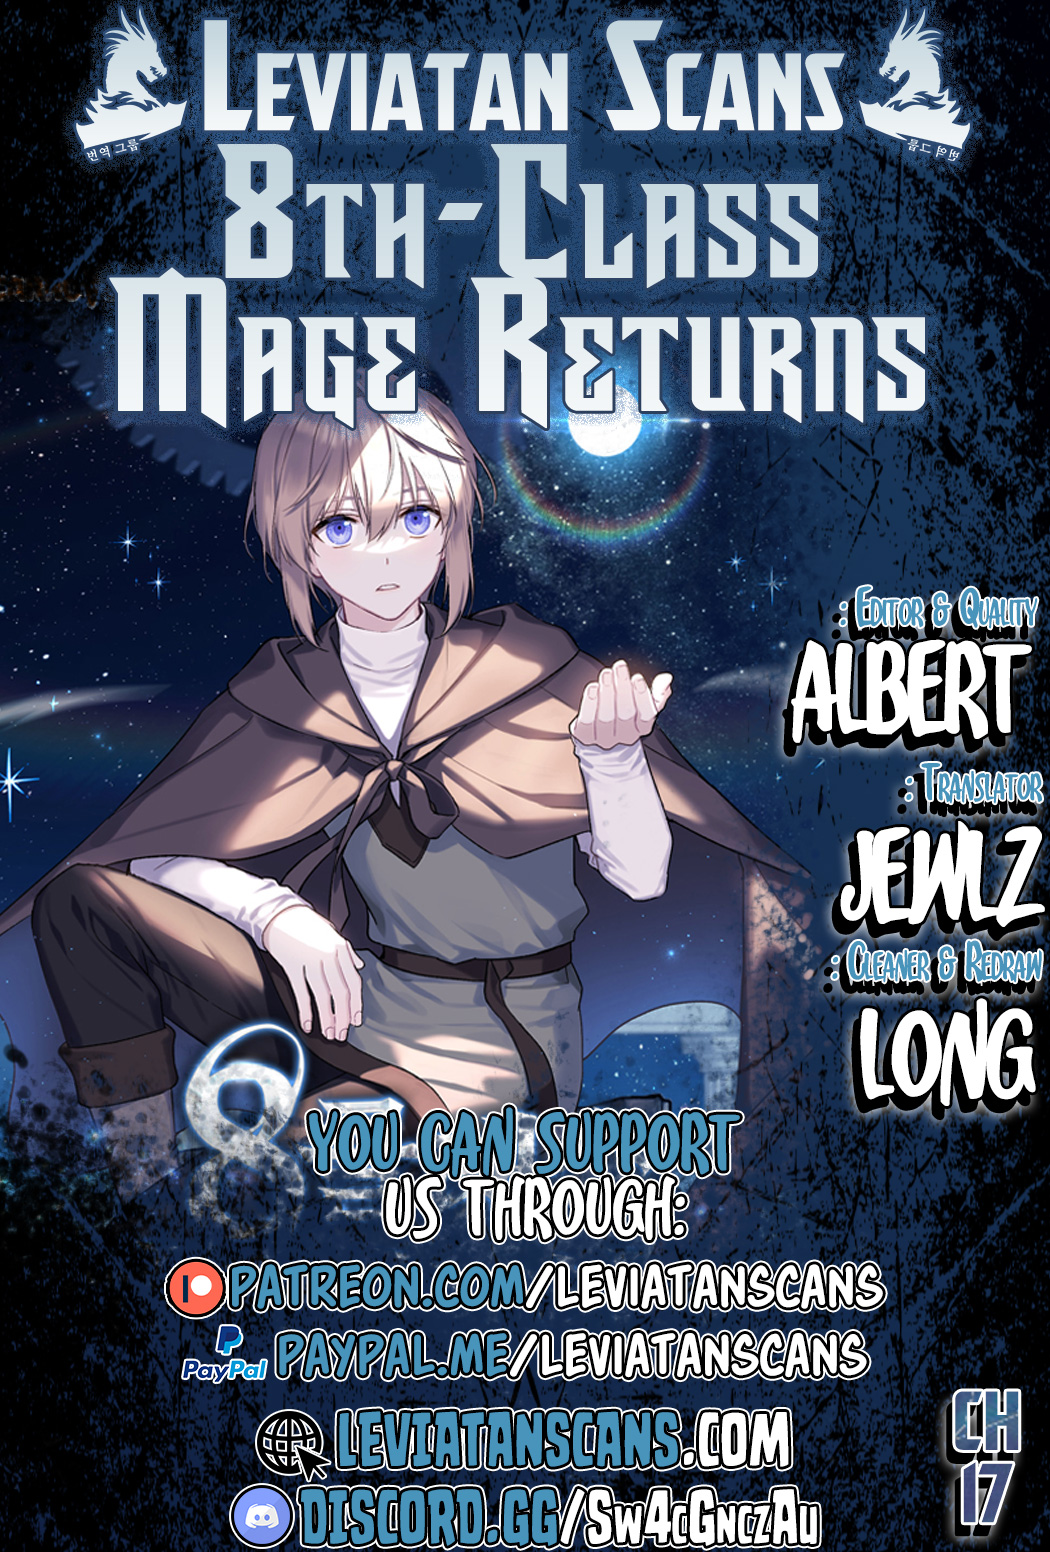 Return of the 8th Class Magician - Chapter 7136 - Image 1